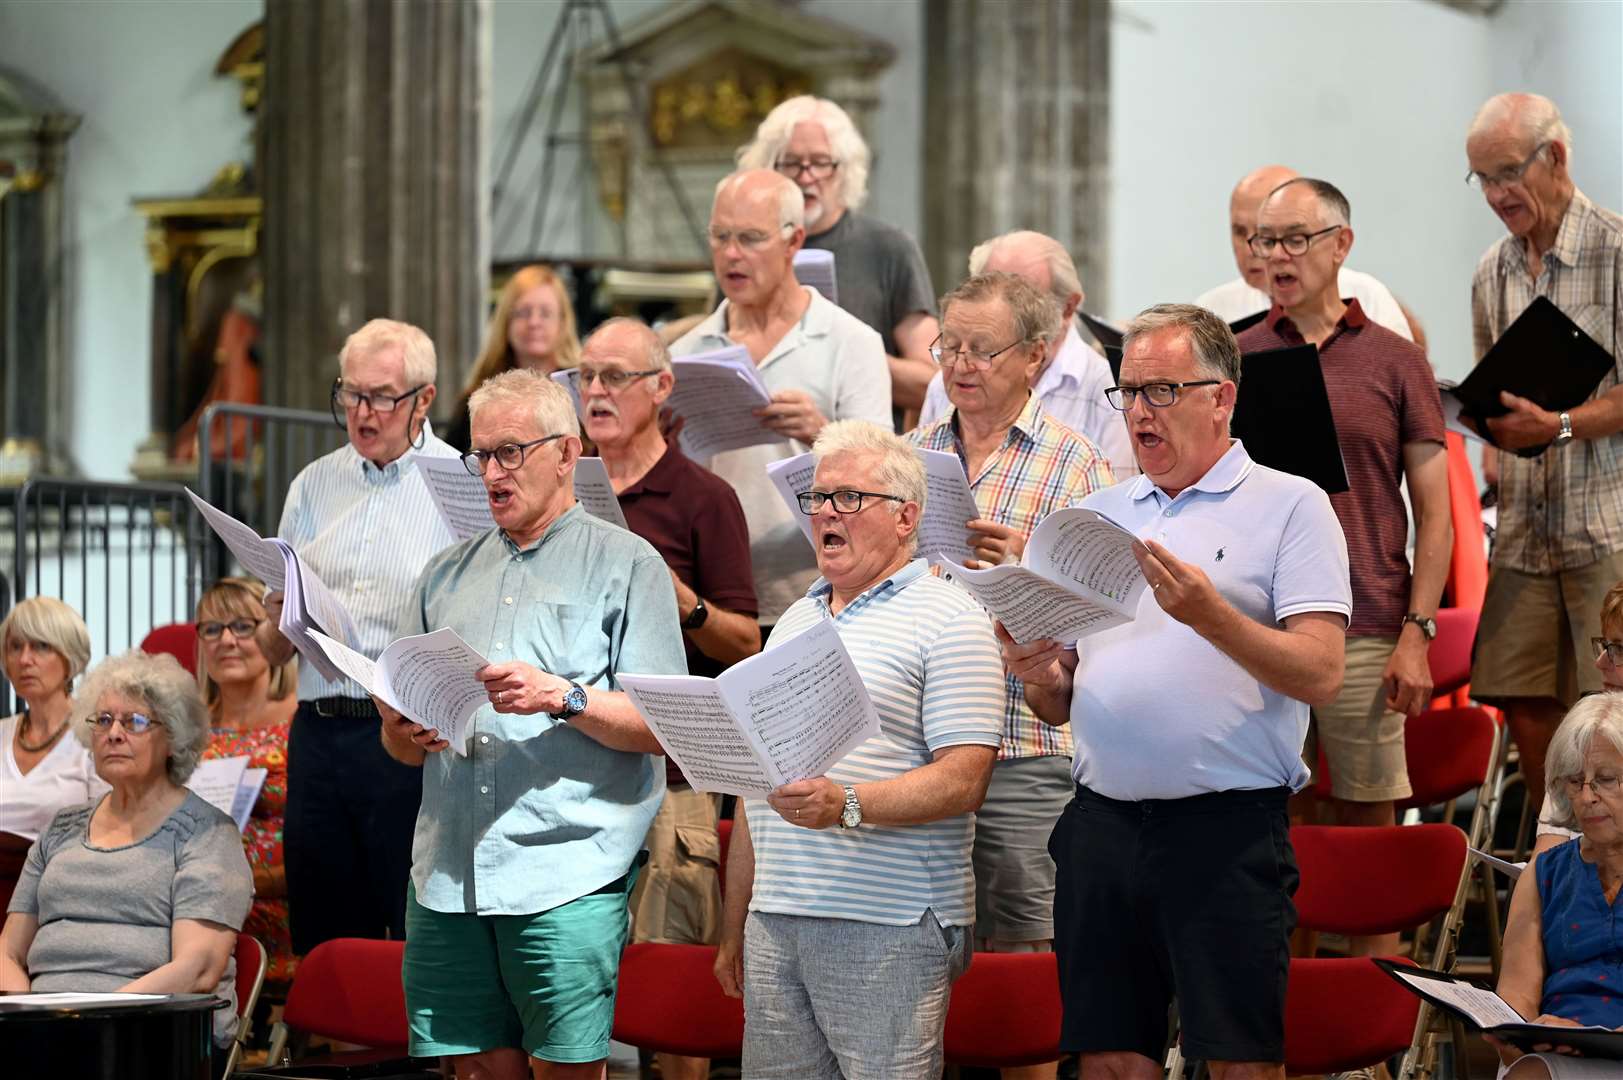 Members of King’s Lynn Festival Chorus performed as part of a workshop of Gilbert & Sullivan favourites ahead of their forthcoming concert this weekend